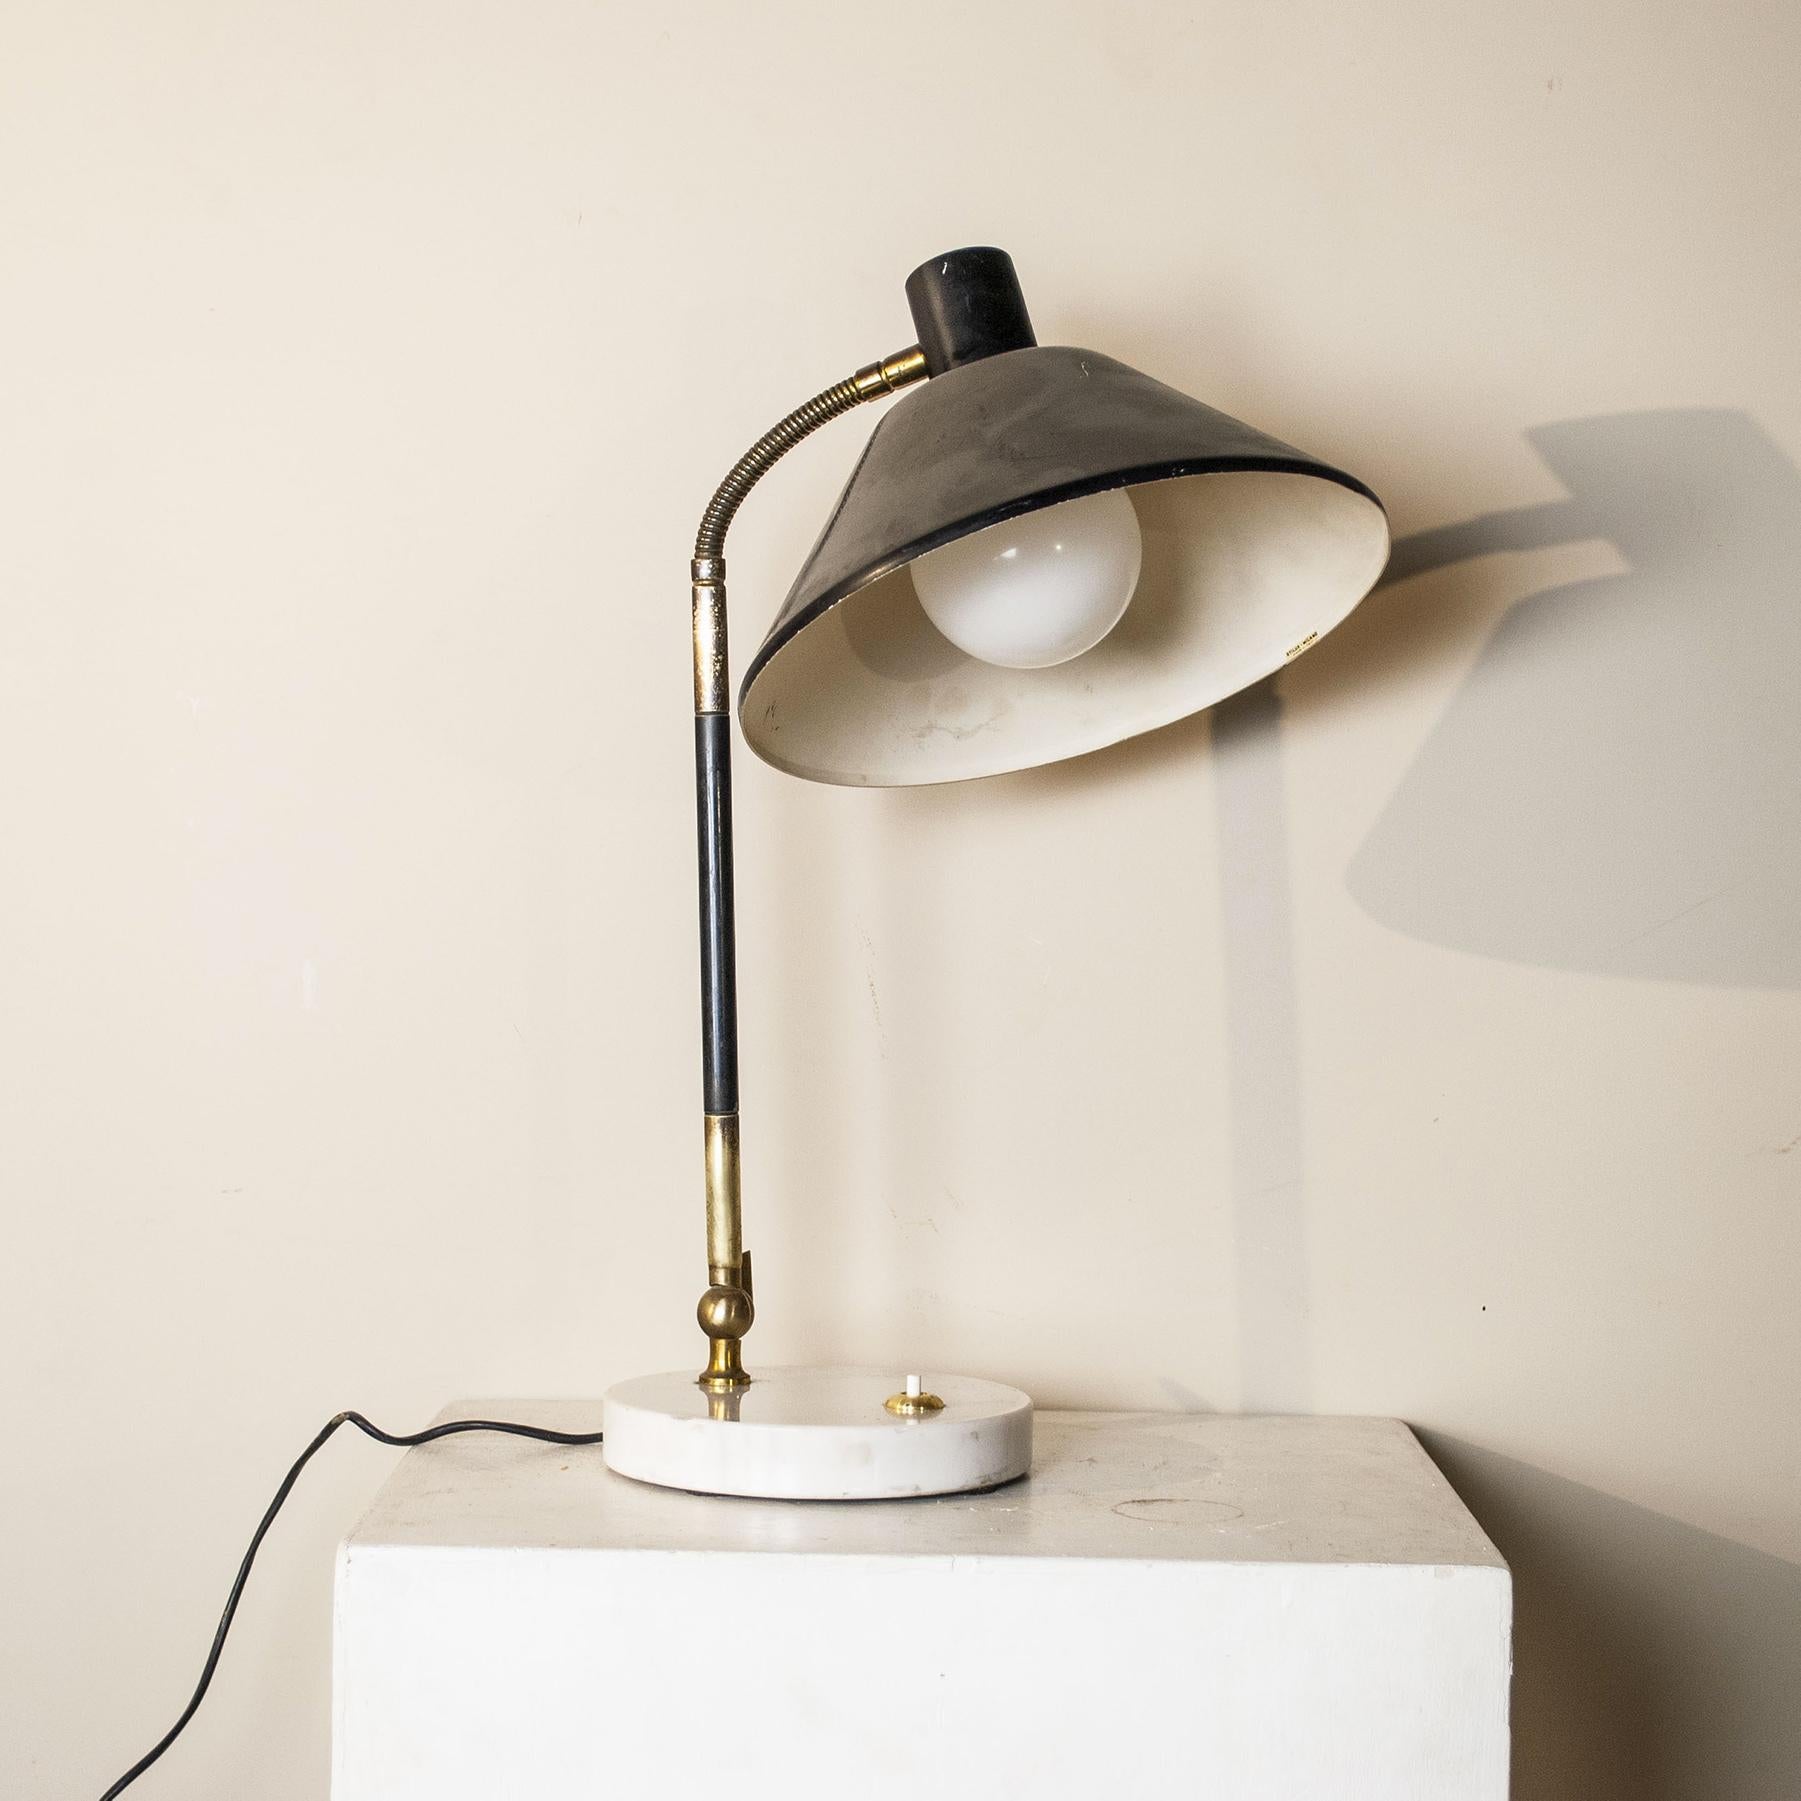 Table lamp with circular marble base, illuminating part in metal, adjustable arm in lacquered metal and brass with brass joints, produced in the late 1950s by Stilux.

Measures: Height 50, variable. Base diameter 18, diffuser diameter 27, maximum